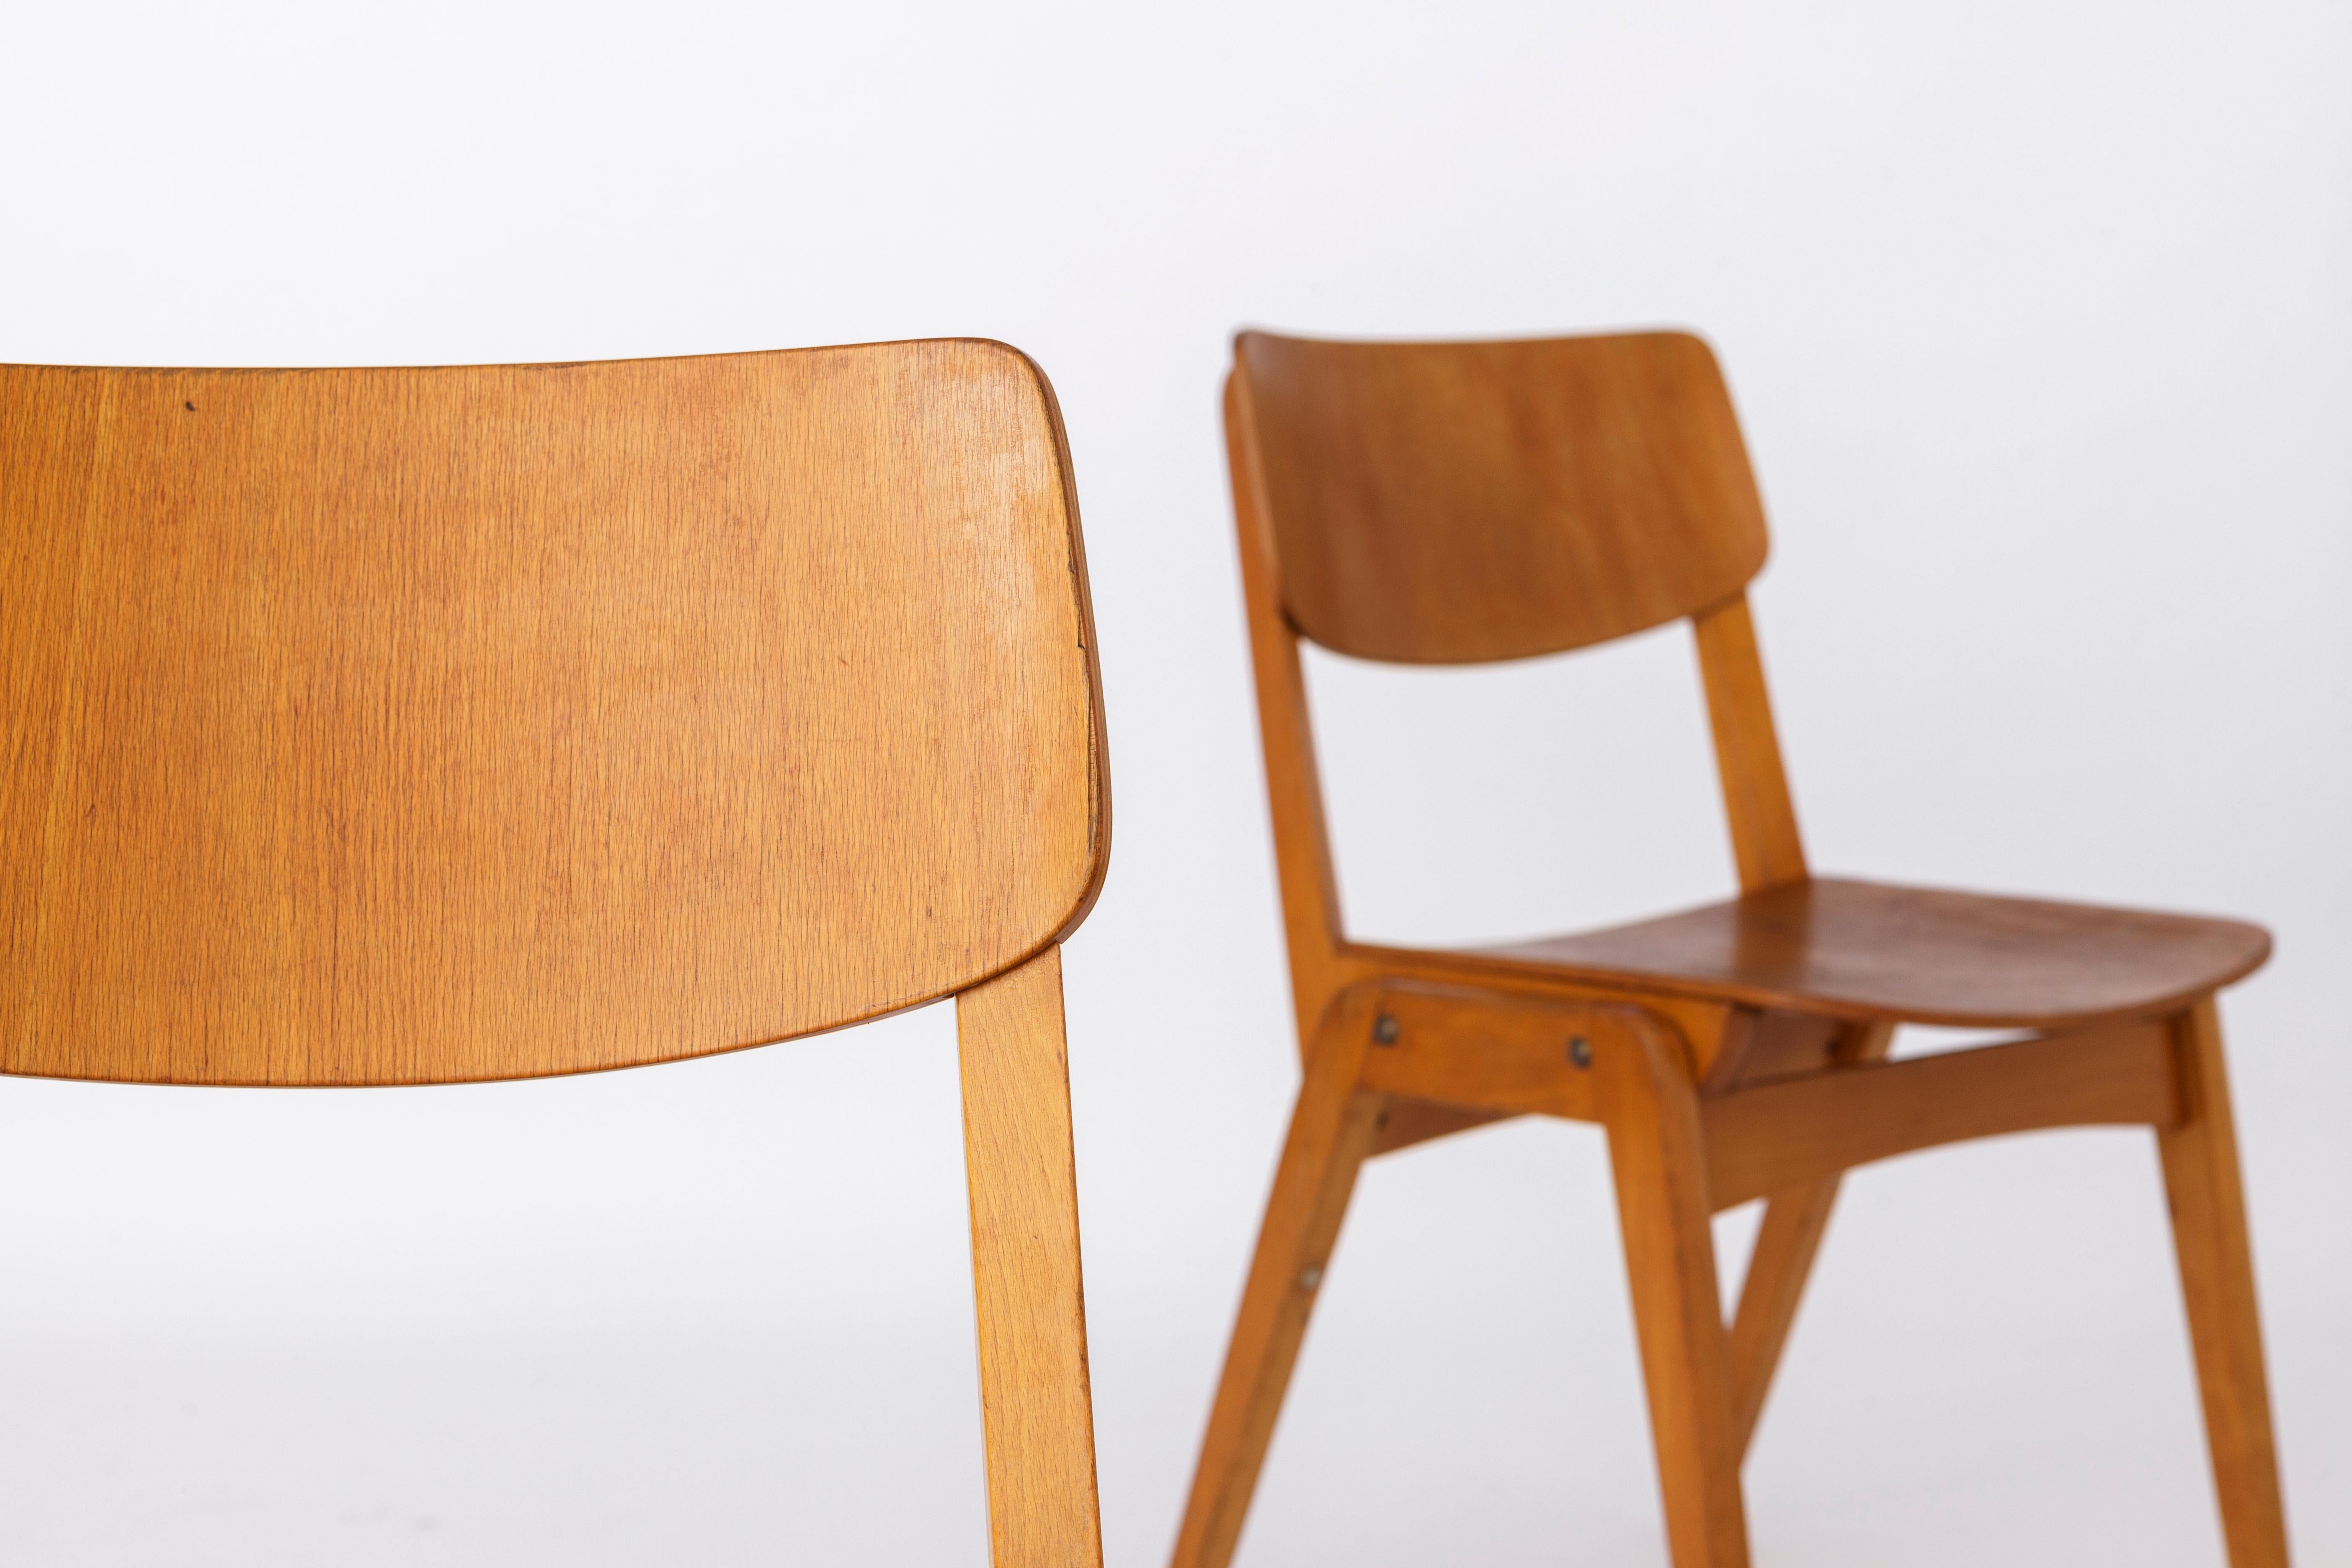 Pair Retro Chairs, 1950s-1960s Vintage Germany For Sale 1